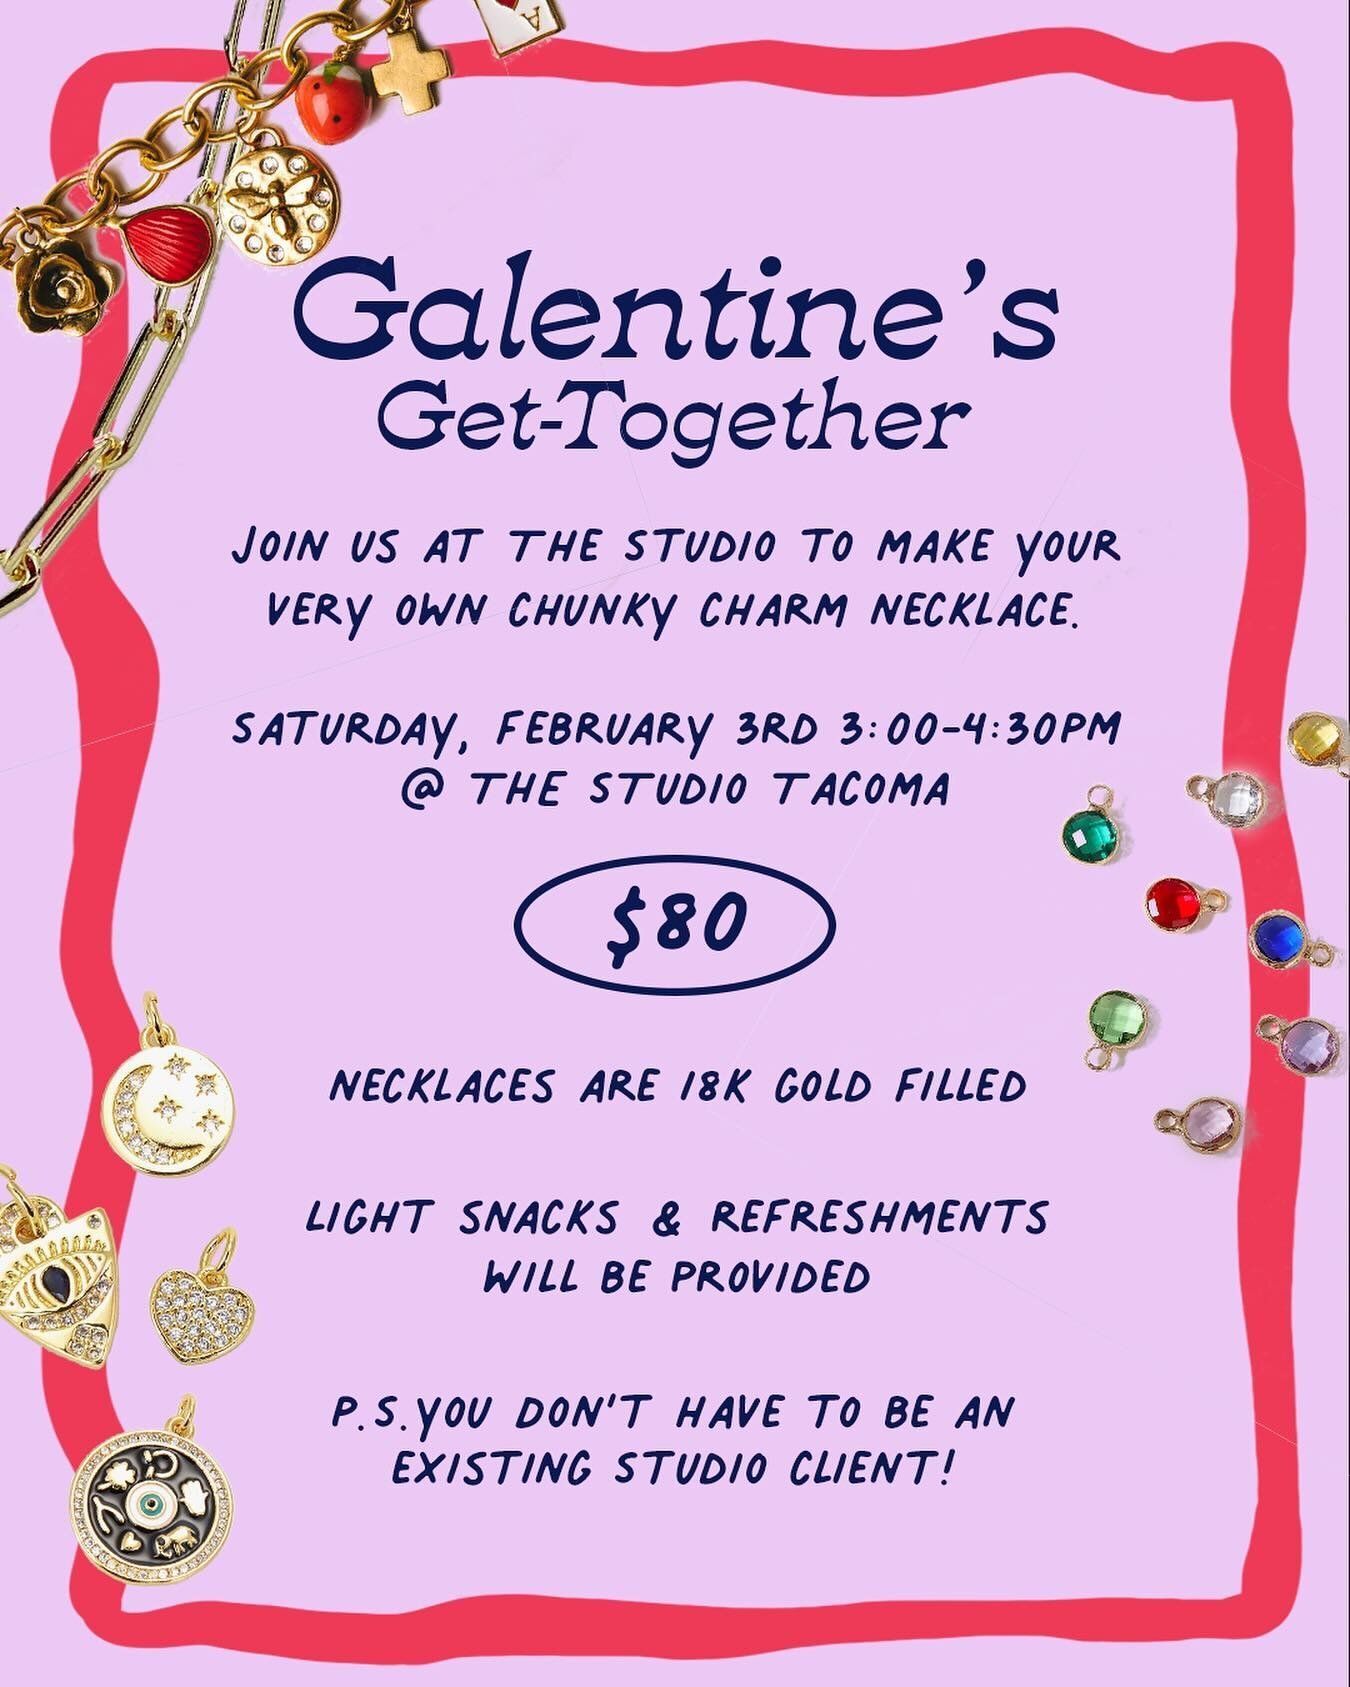 Get your girls and join us for a girly galentine&rsquo;s afternoon💕🎀✨All are welcome, no Pilates experience necessary! 😉 Grab a spot while you can, link in bio to sign up.✨